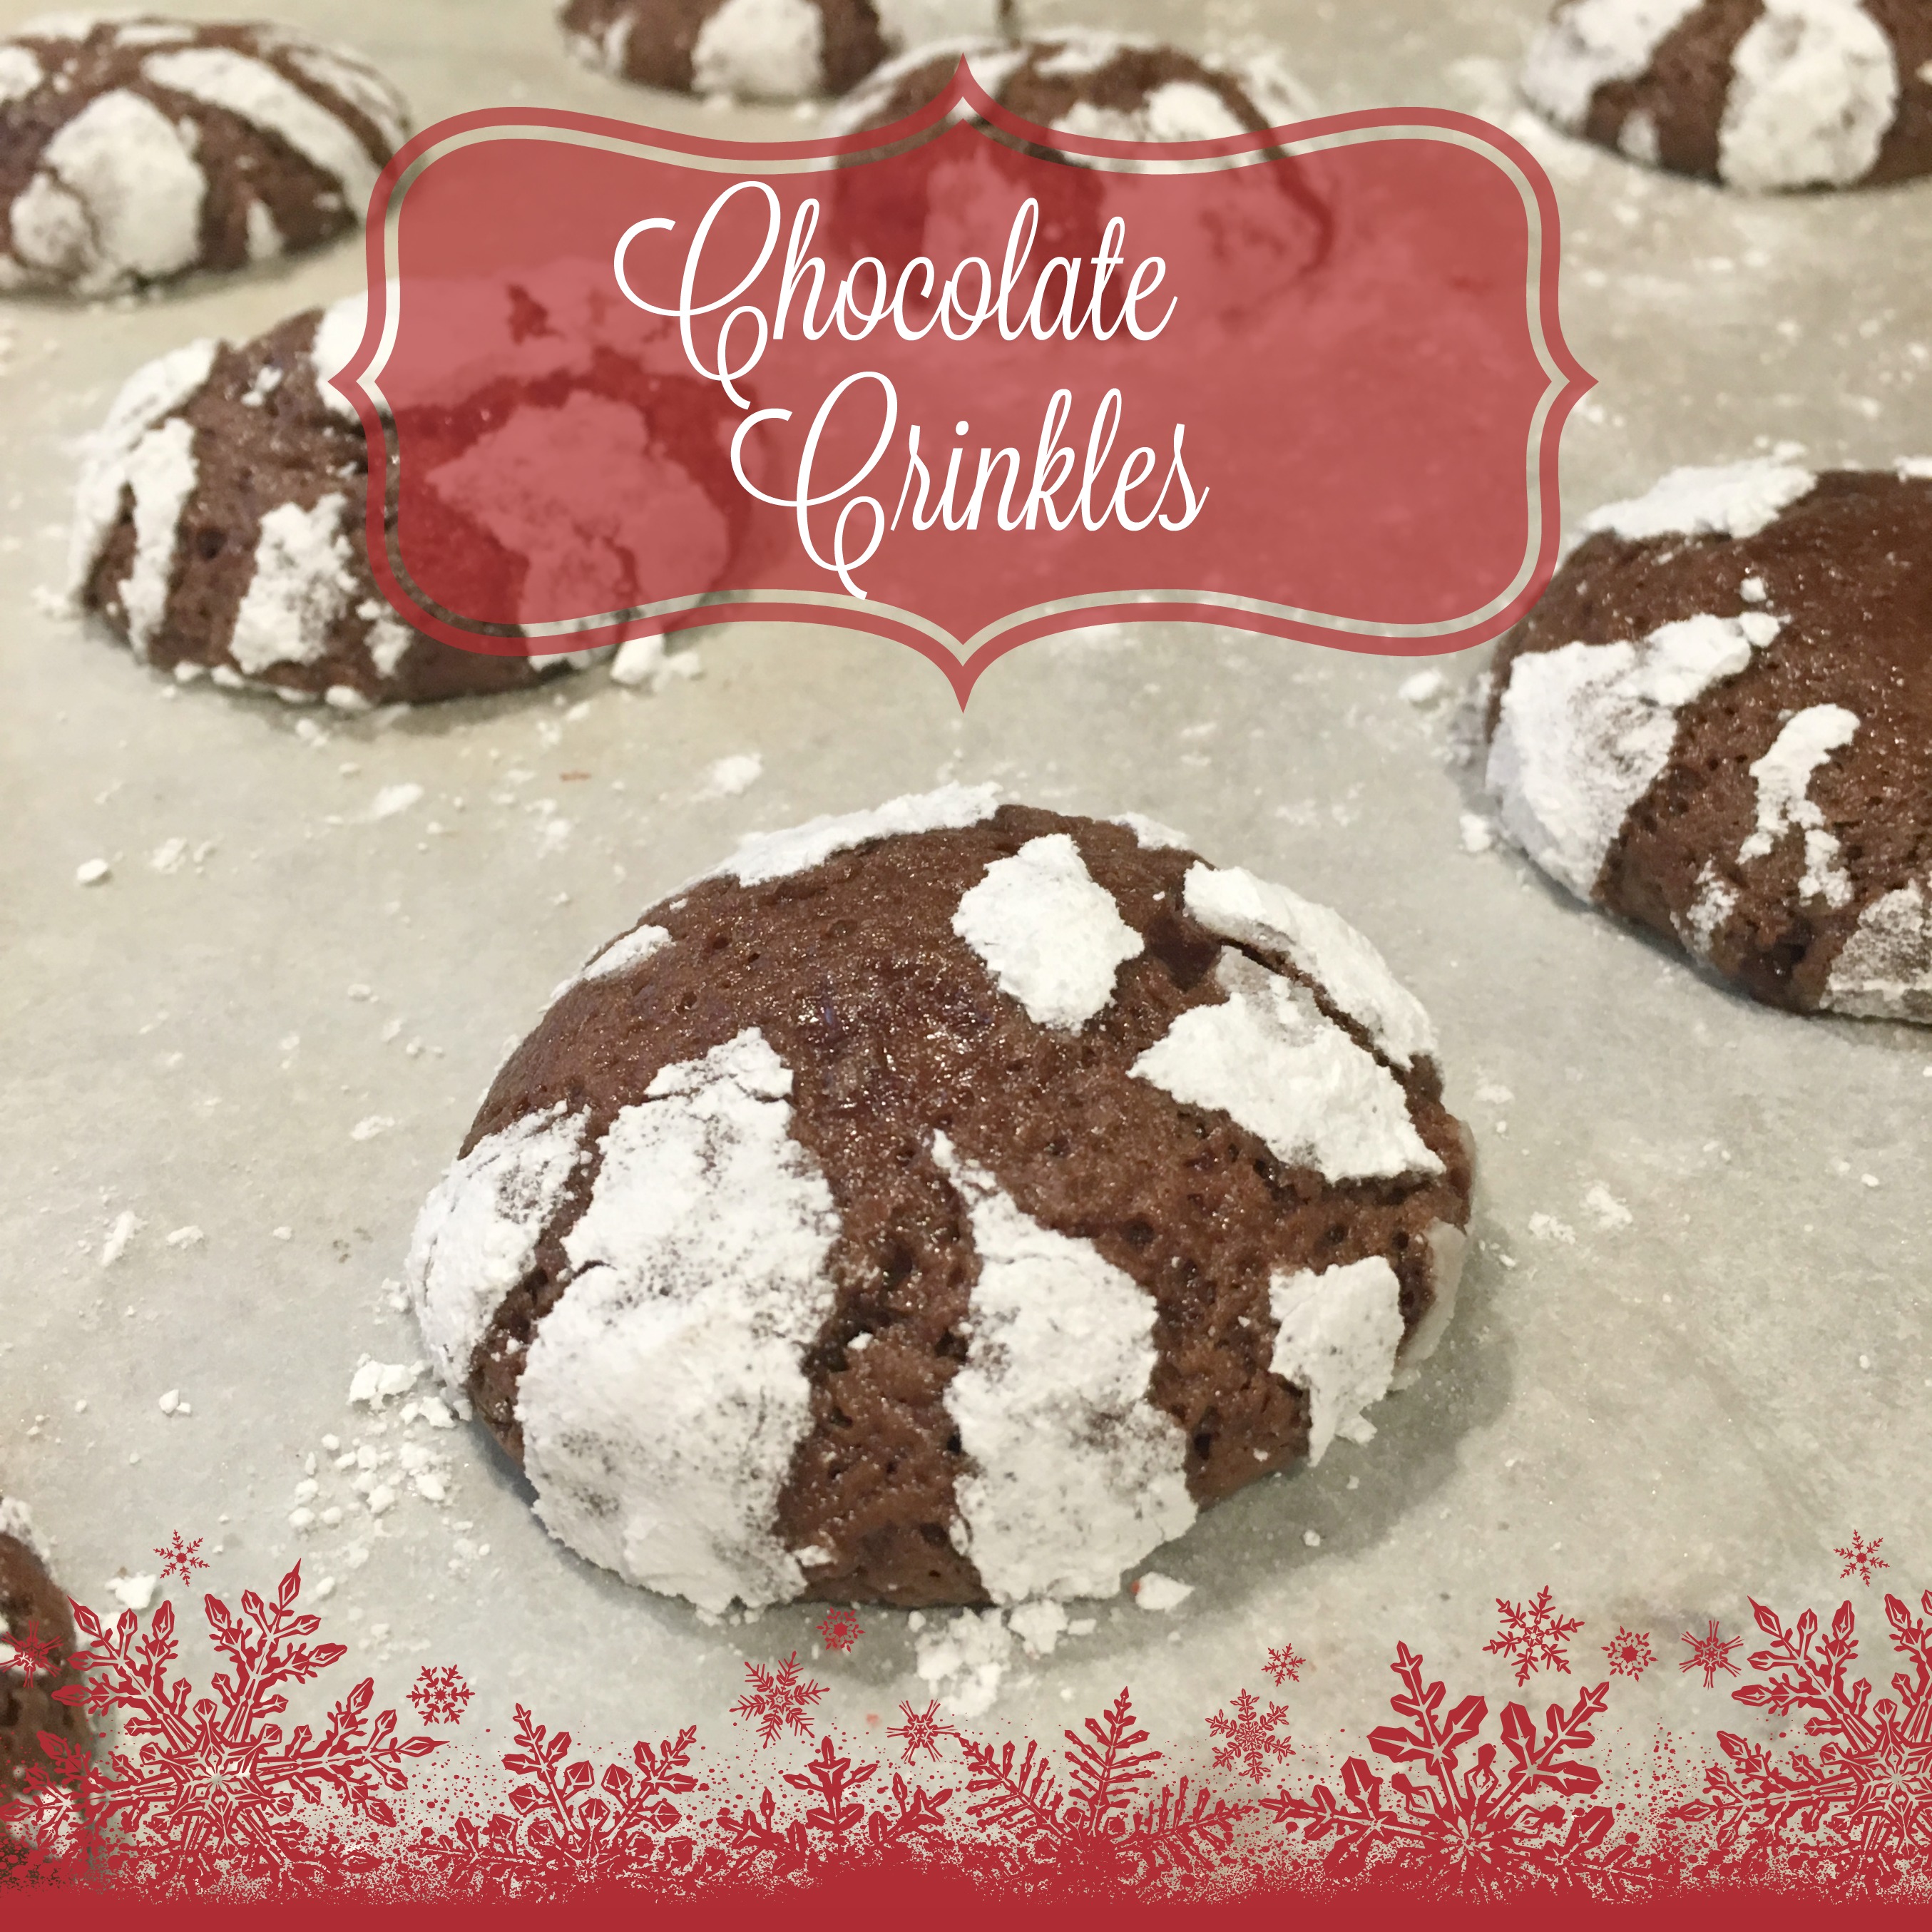 Second Day of Baking: Chocolate Crinkles